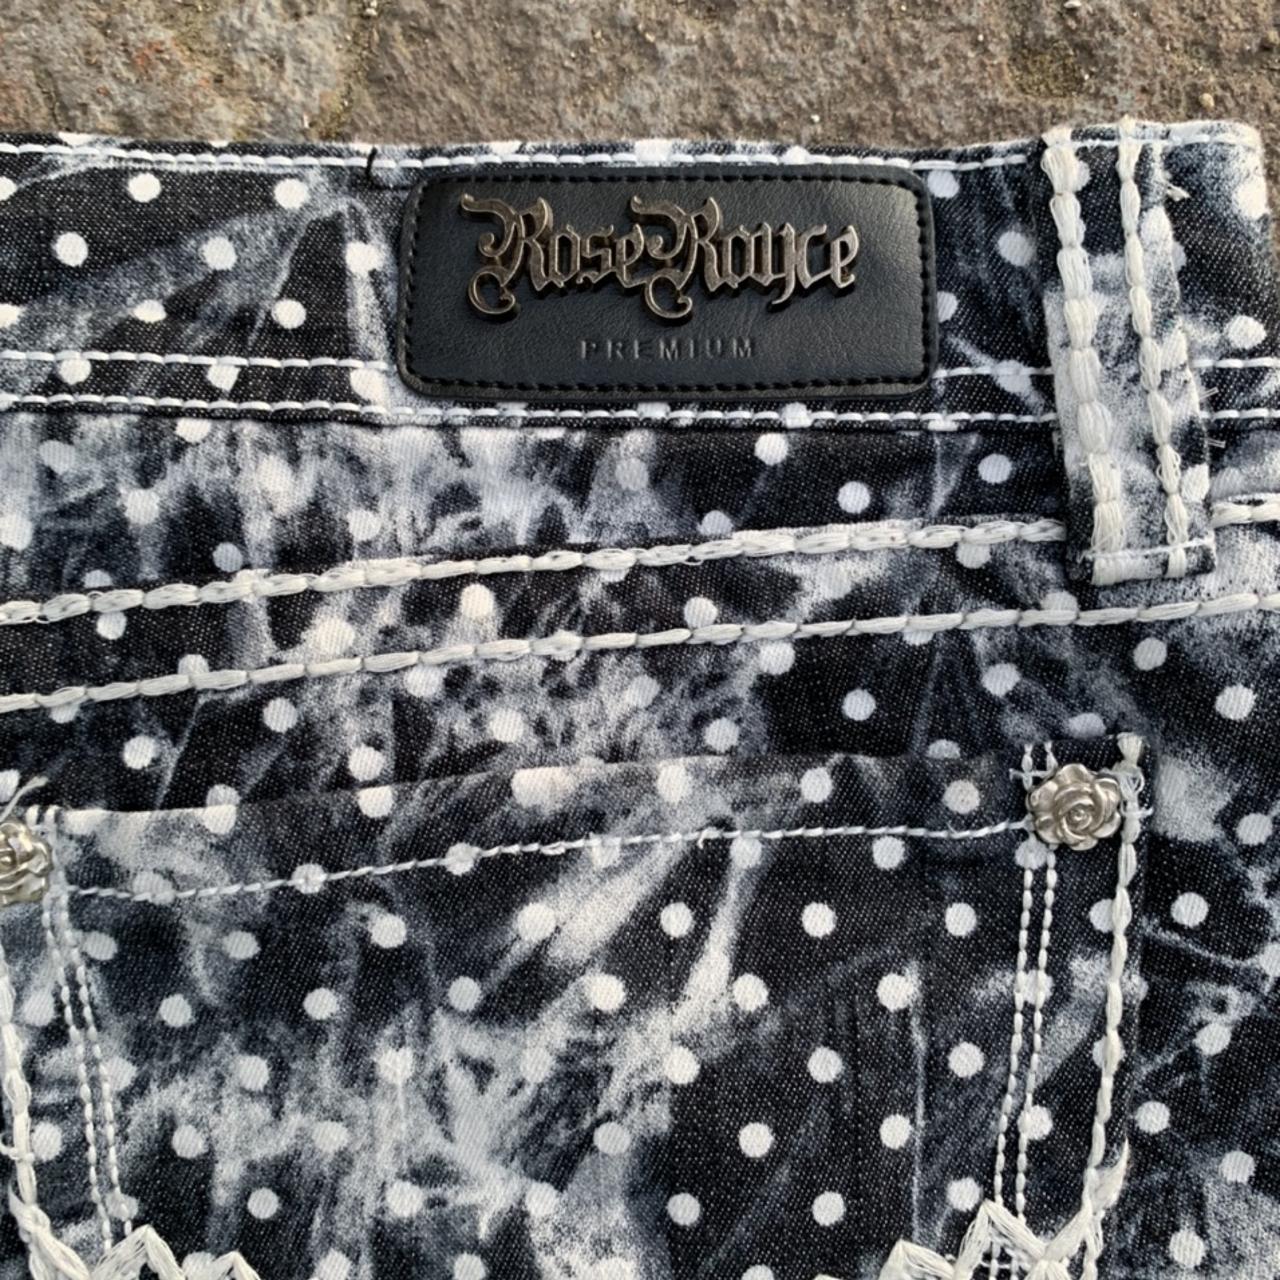 Product Image 3 - Rose Royce Shorts

New without tags

▪️All